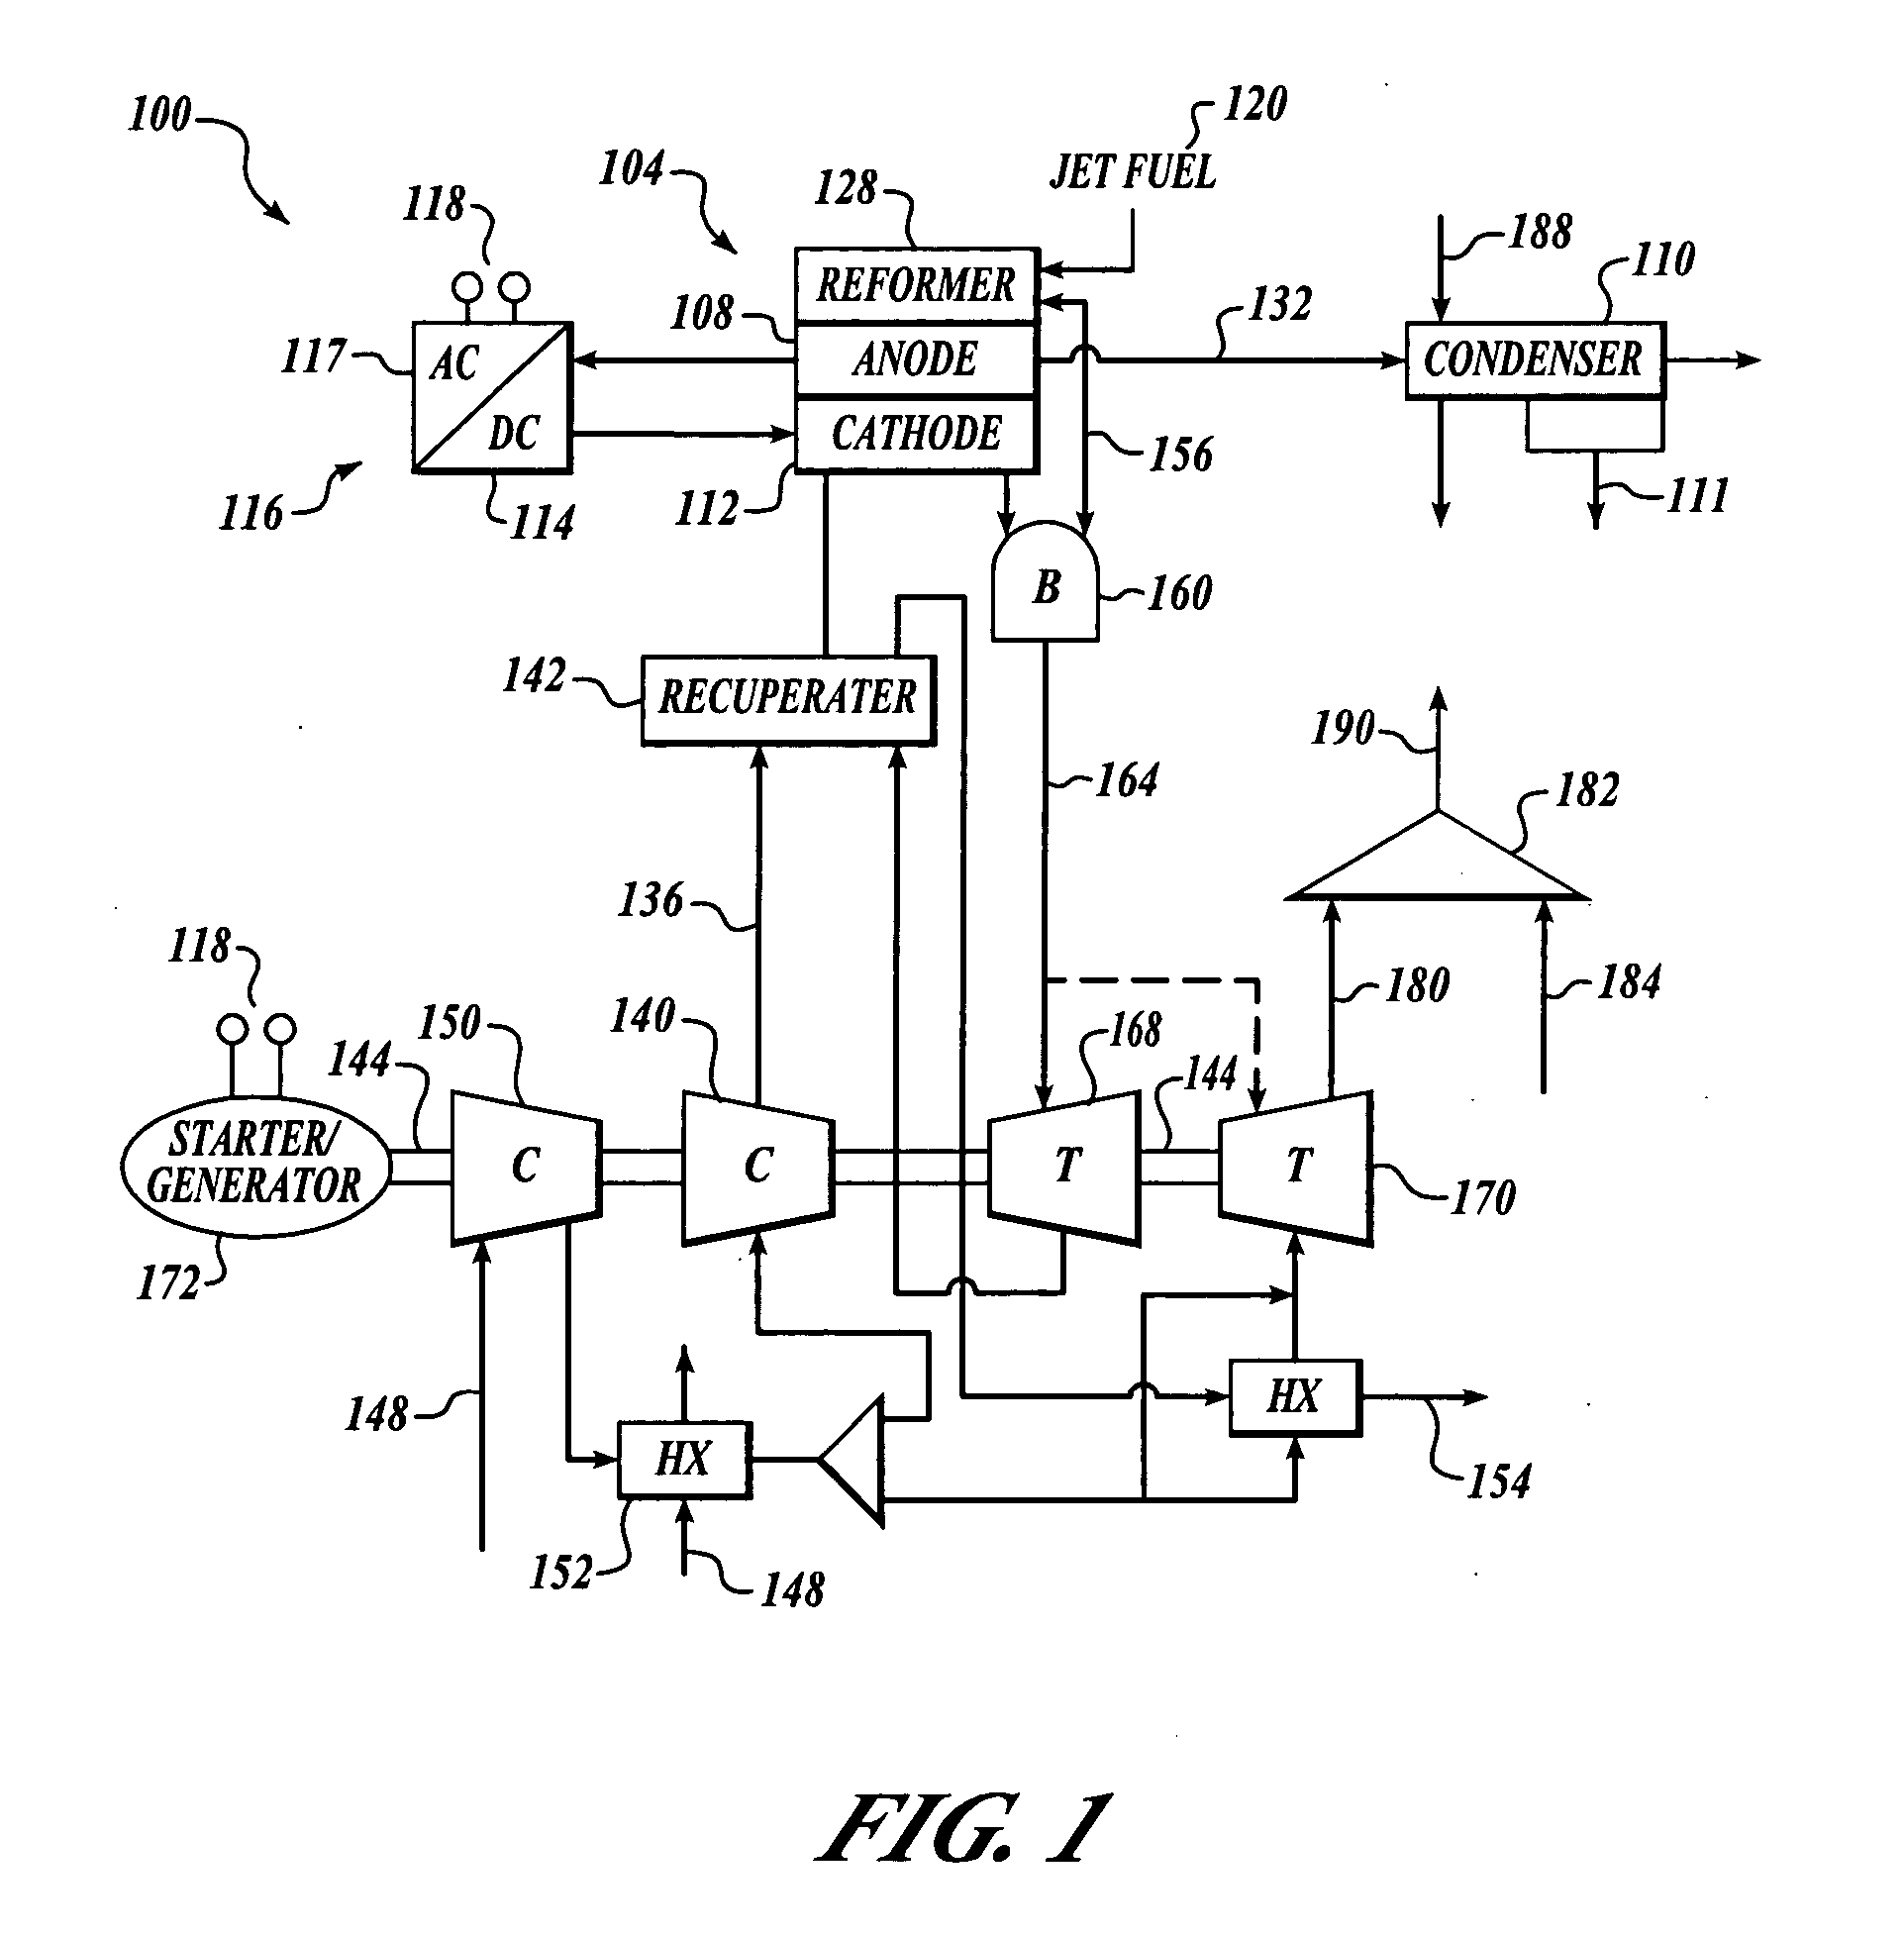 Combined fuel cell aircraft auxiliary power unit and environmental control system